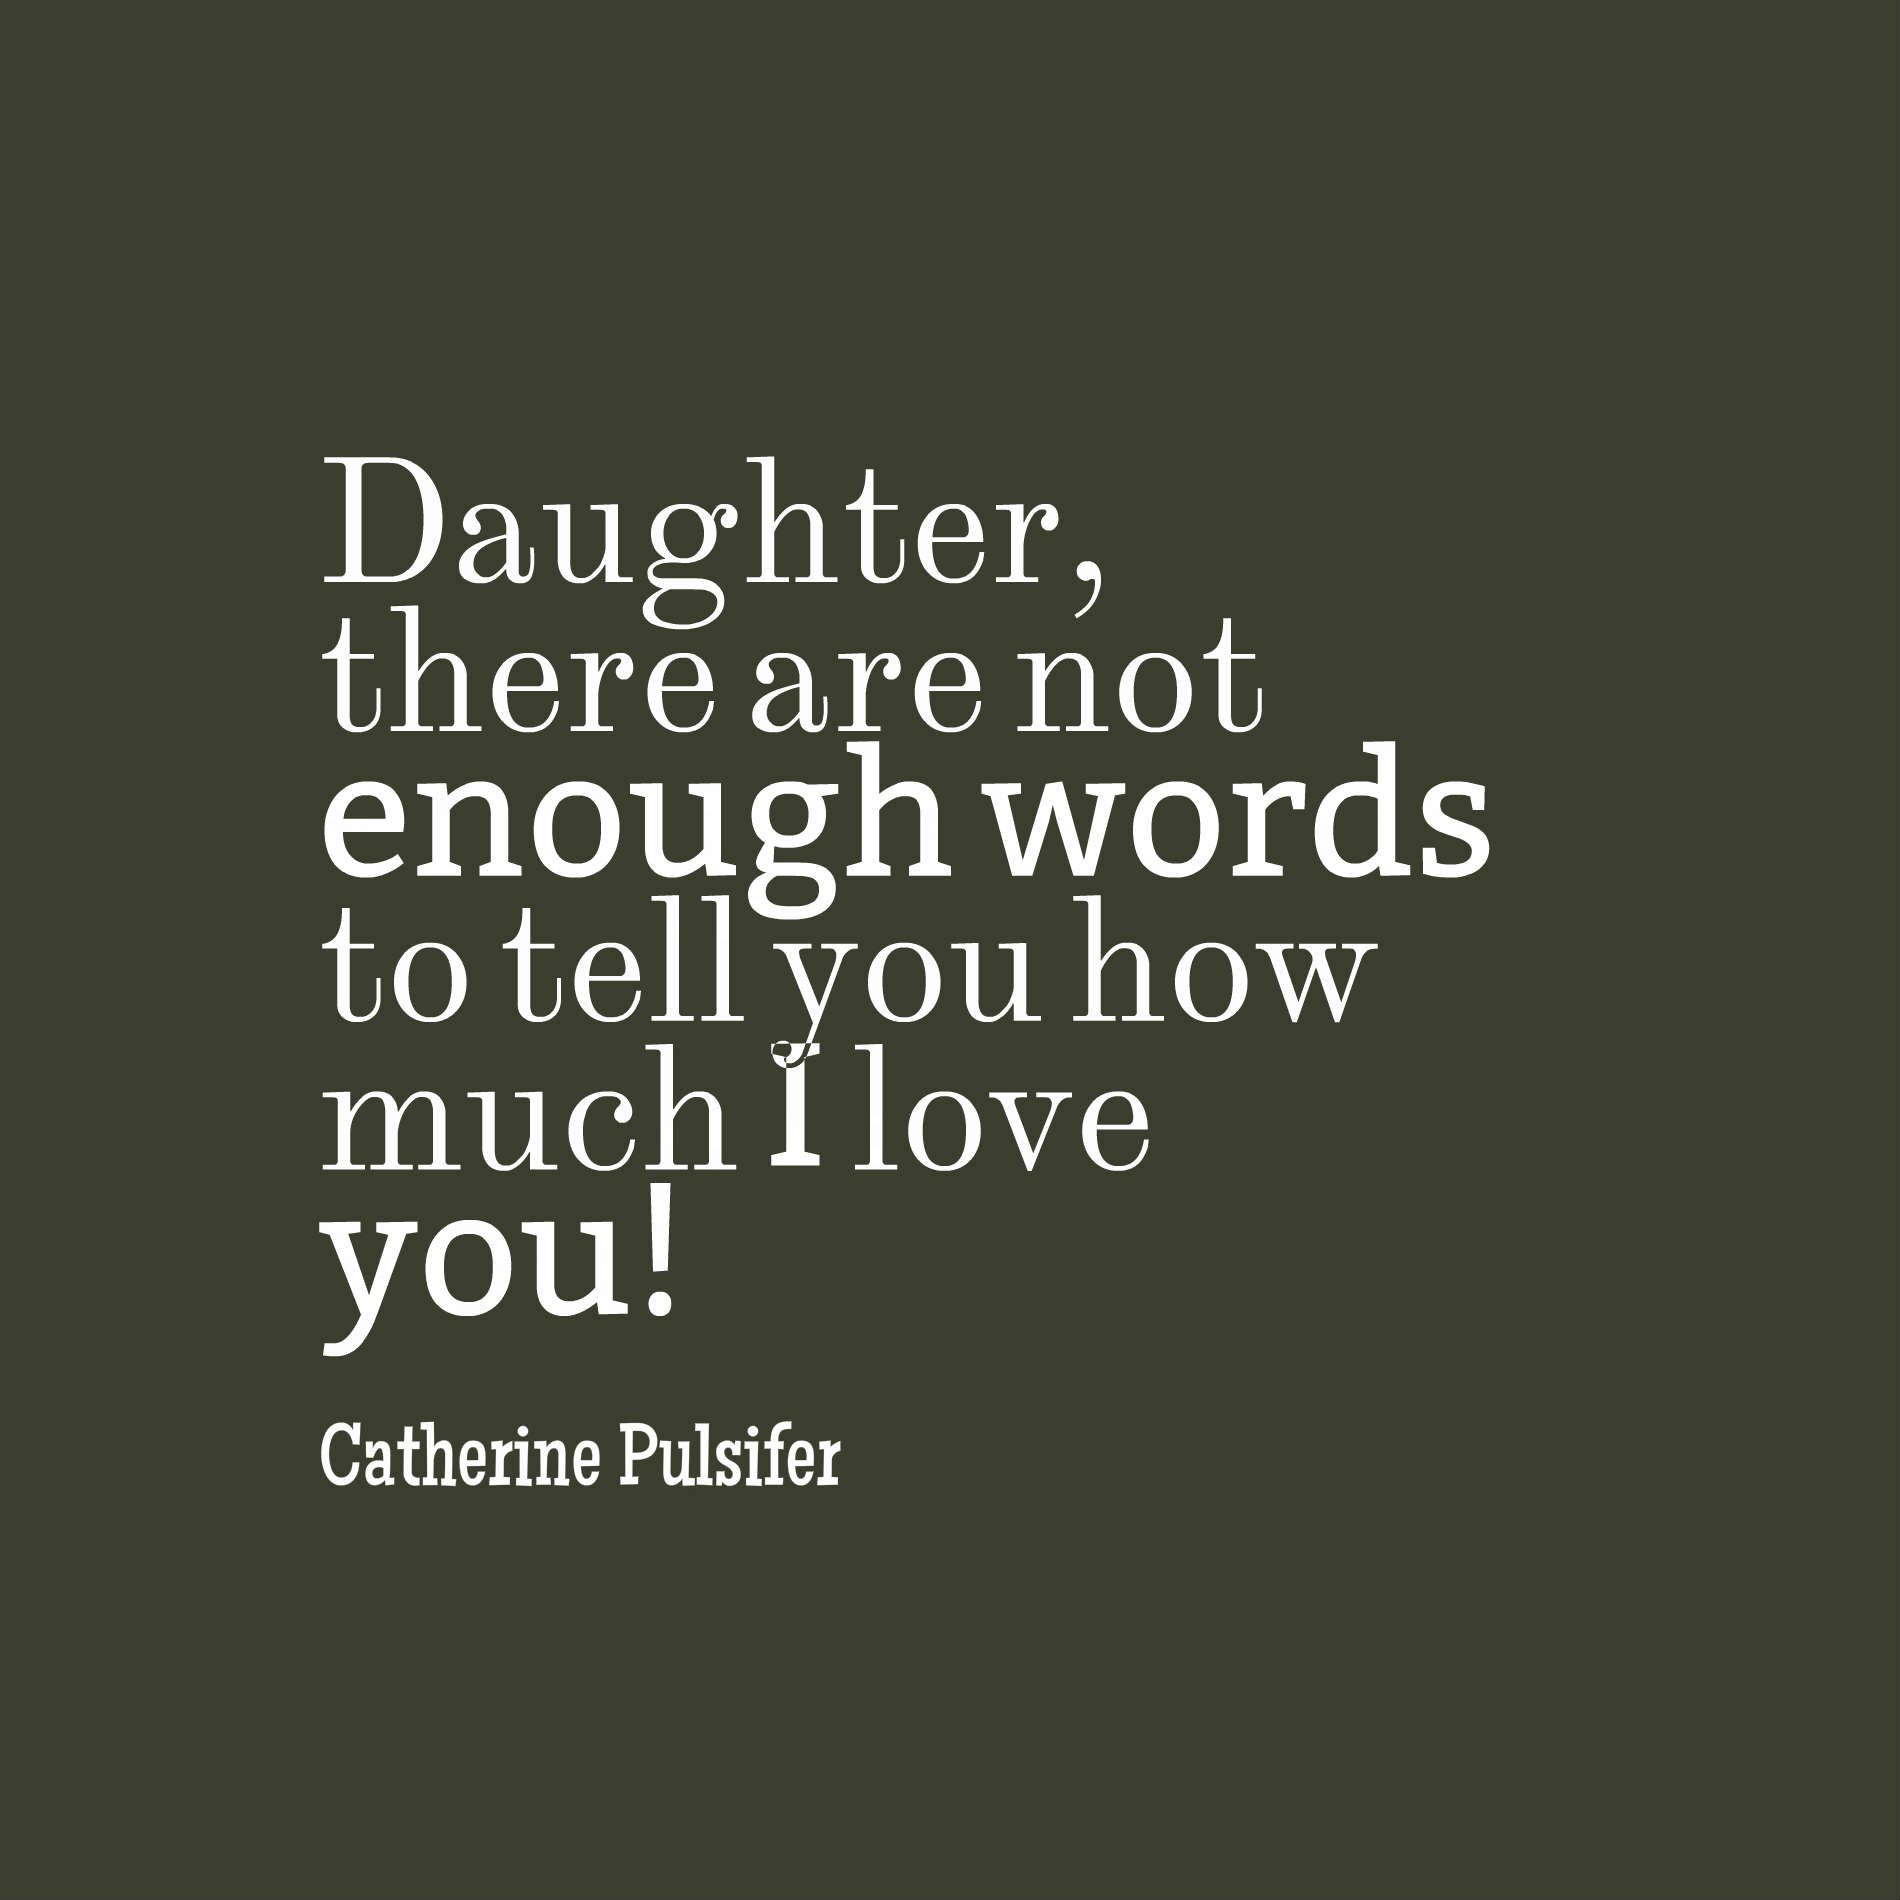 Daughter, there are not enough words to tell you how much I love you!